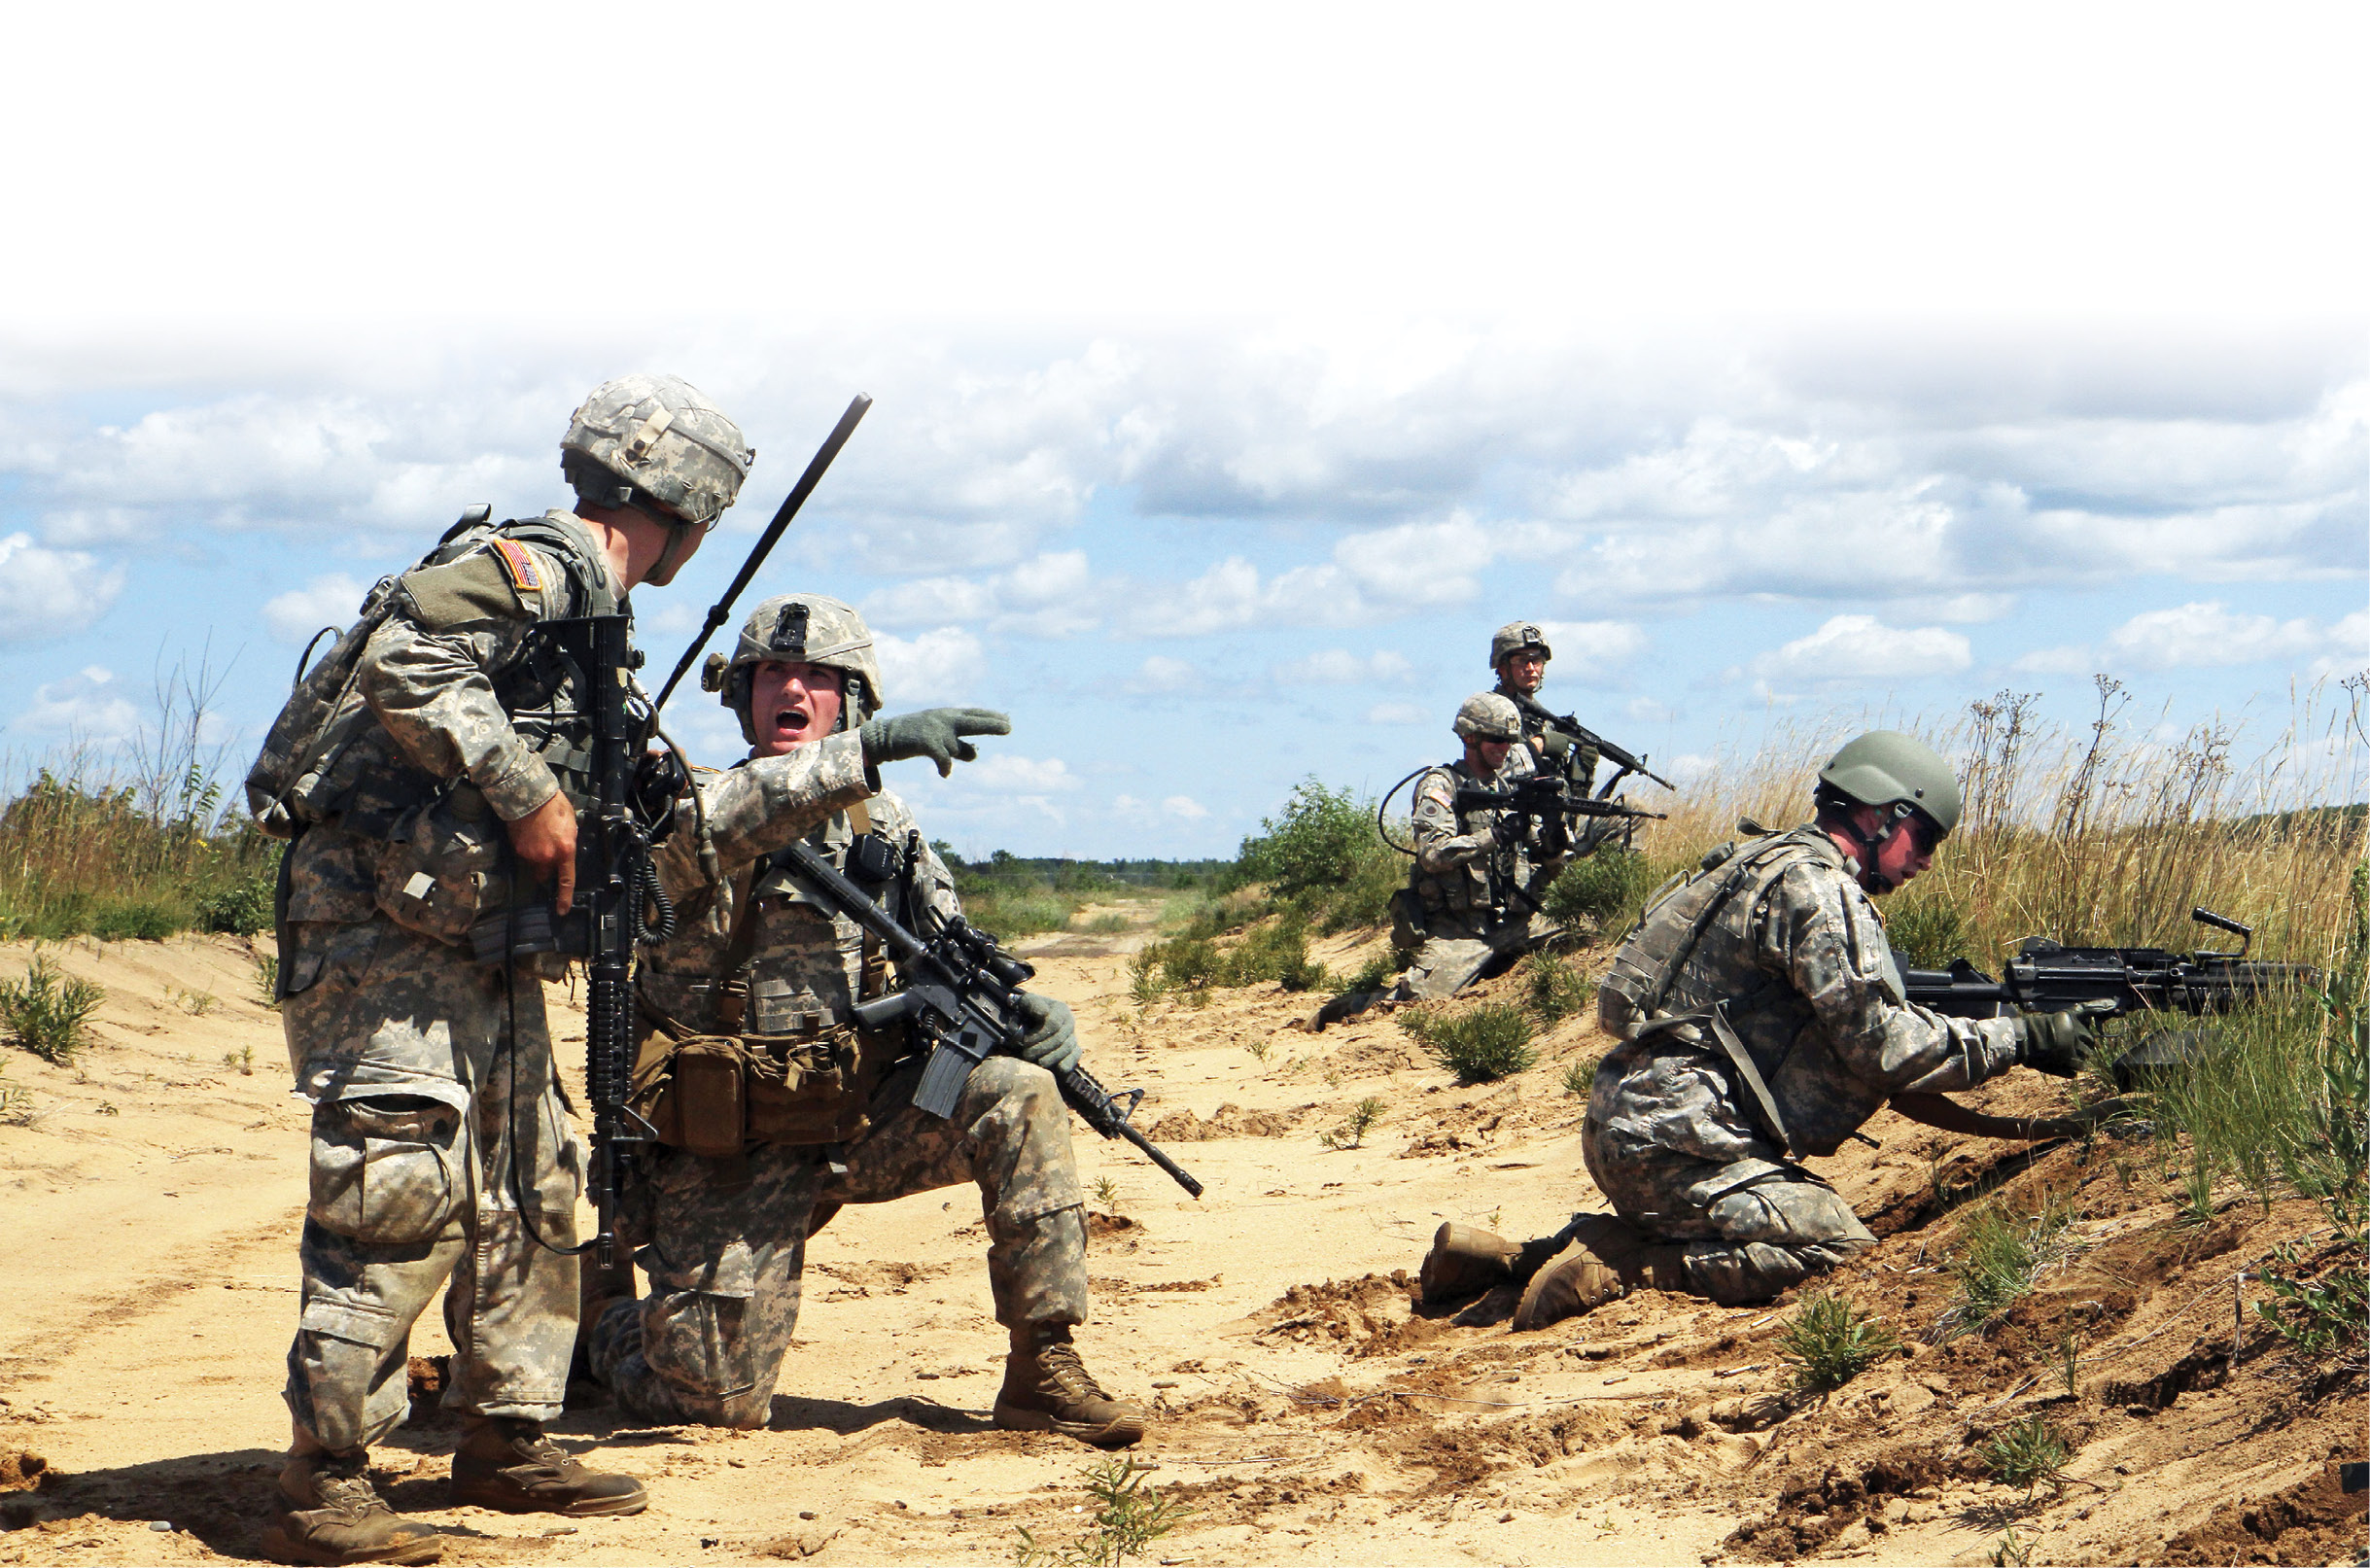 Sgt. Gregory Padilla (second from left) gives a status report to 2nd Lt. Randy Jozwiak (left) during a live-fire exercise 20 July 2015 as part of Northern Strike 15 on Camp Grayling Joint Maneuver Training Center, Michigan. Padilla is a team leader and Jozwiak is a platoon leader assigned to the 1st Battalion, 126th Cavalry Regiment. (Photo by Sgt. Seth LaCount, U.S. Army)